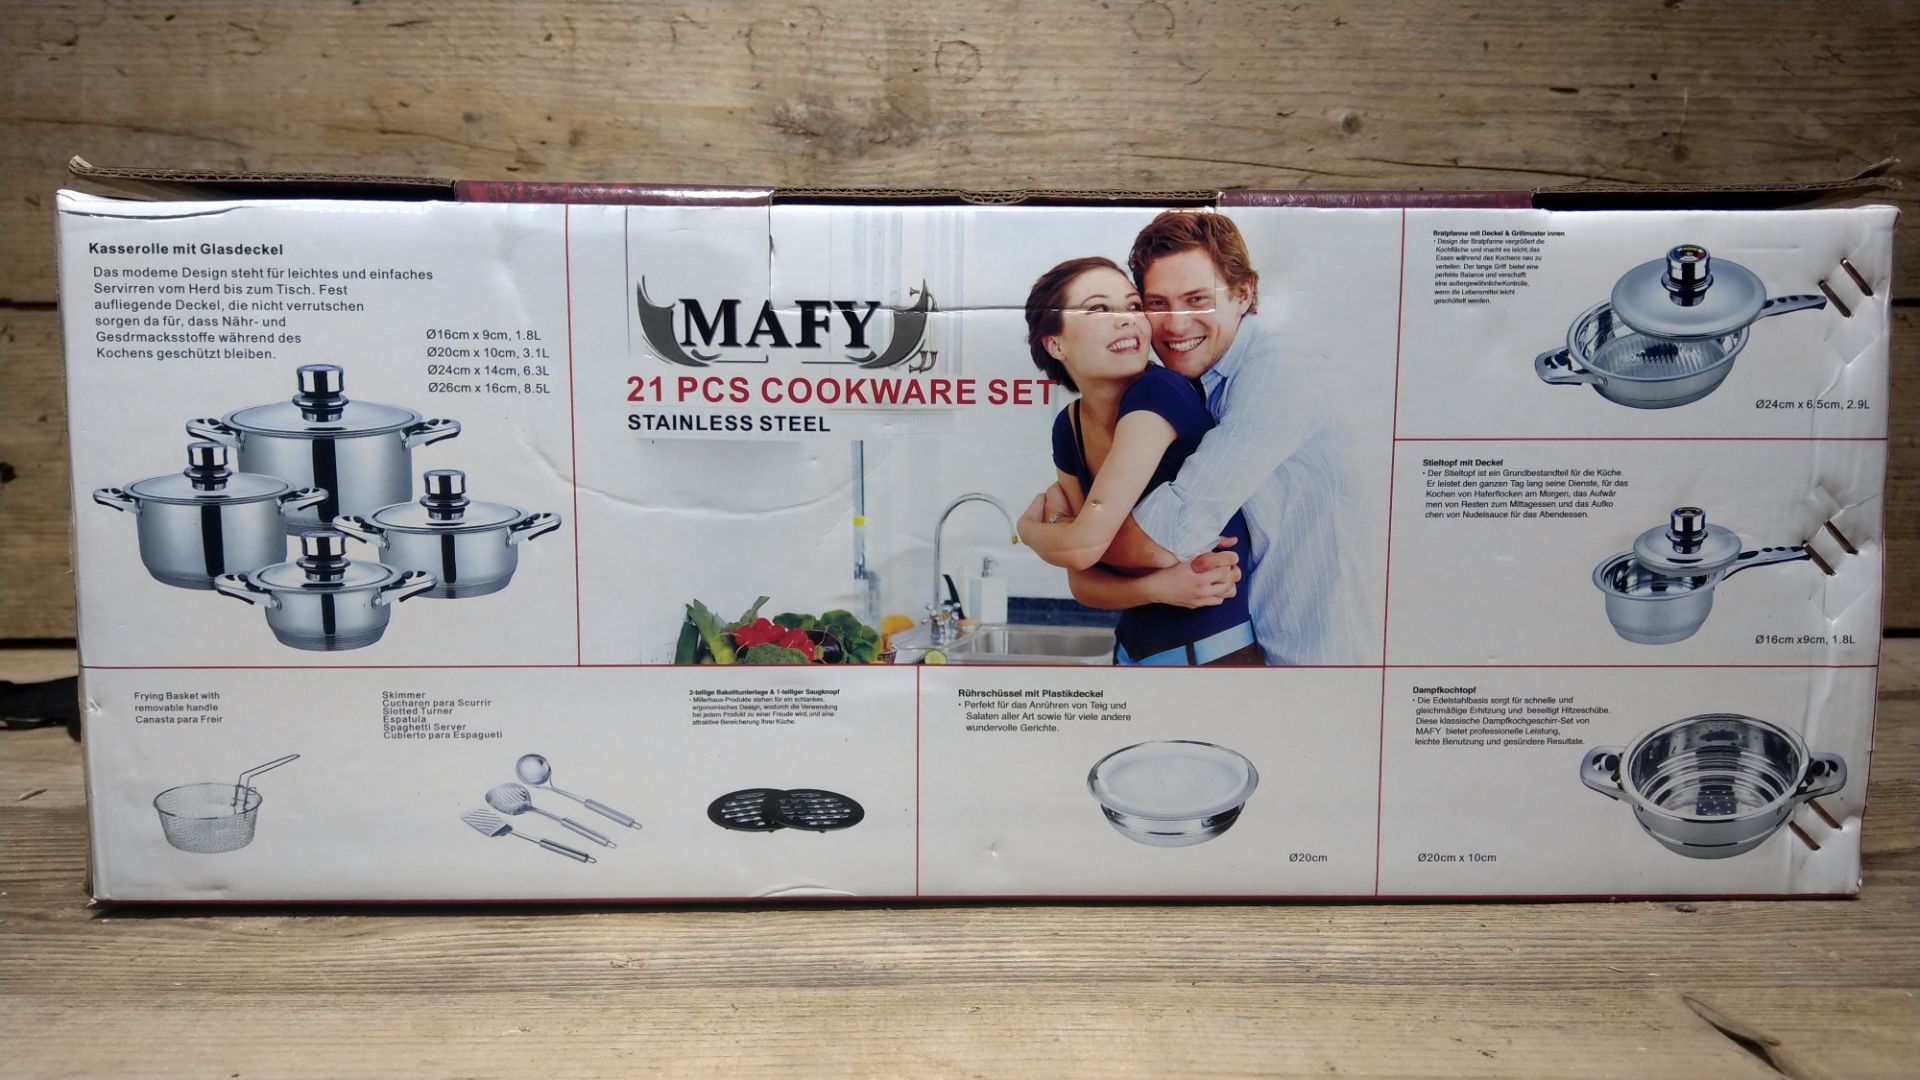 1x Mafy 21 Piece Stainless Steel Cookware set Swiss box 1 - Image 3 of 3